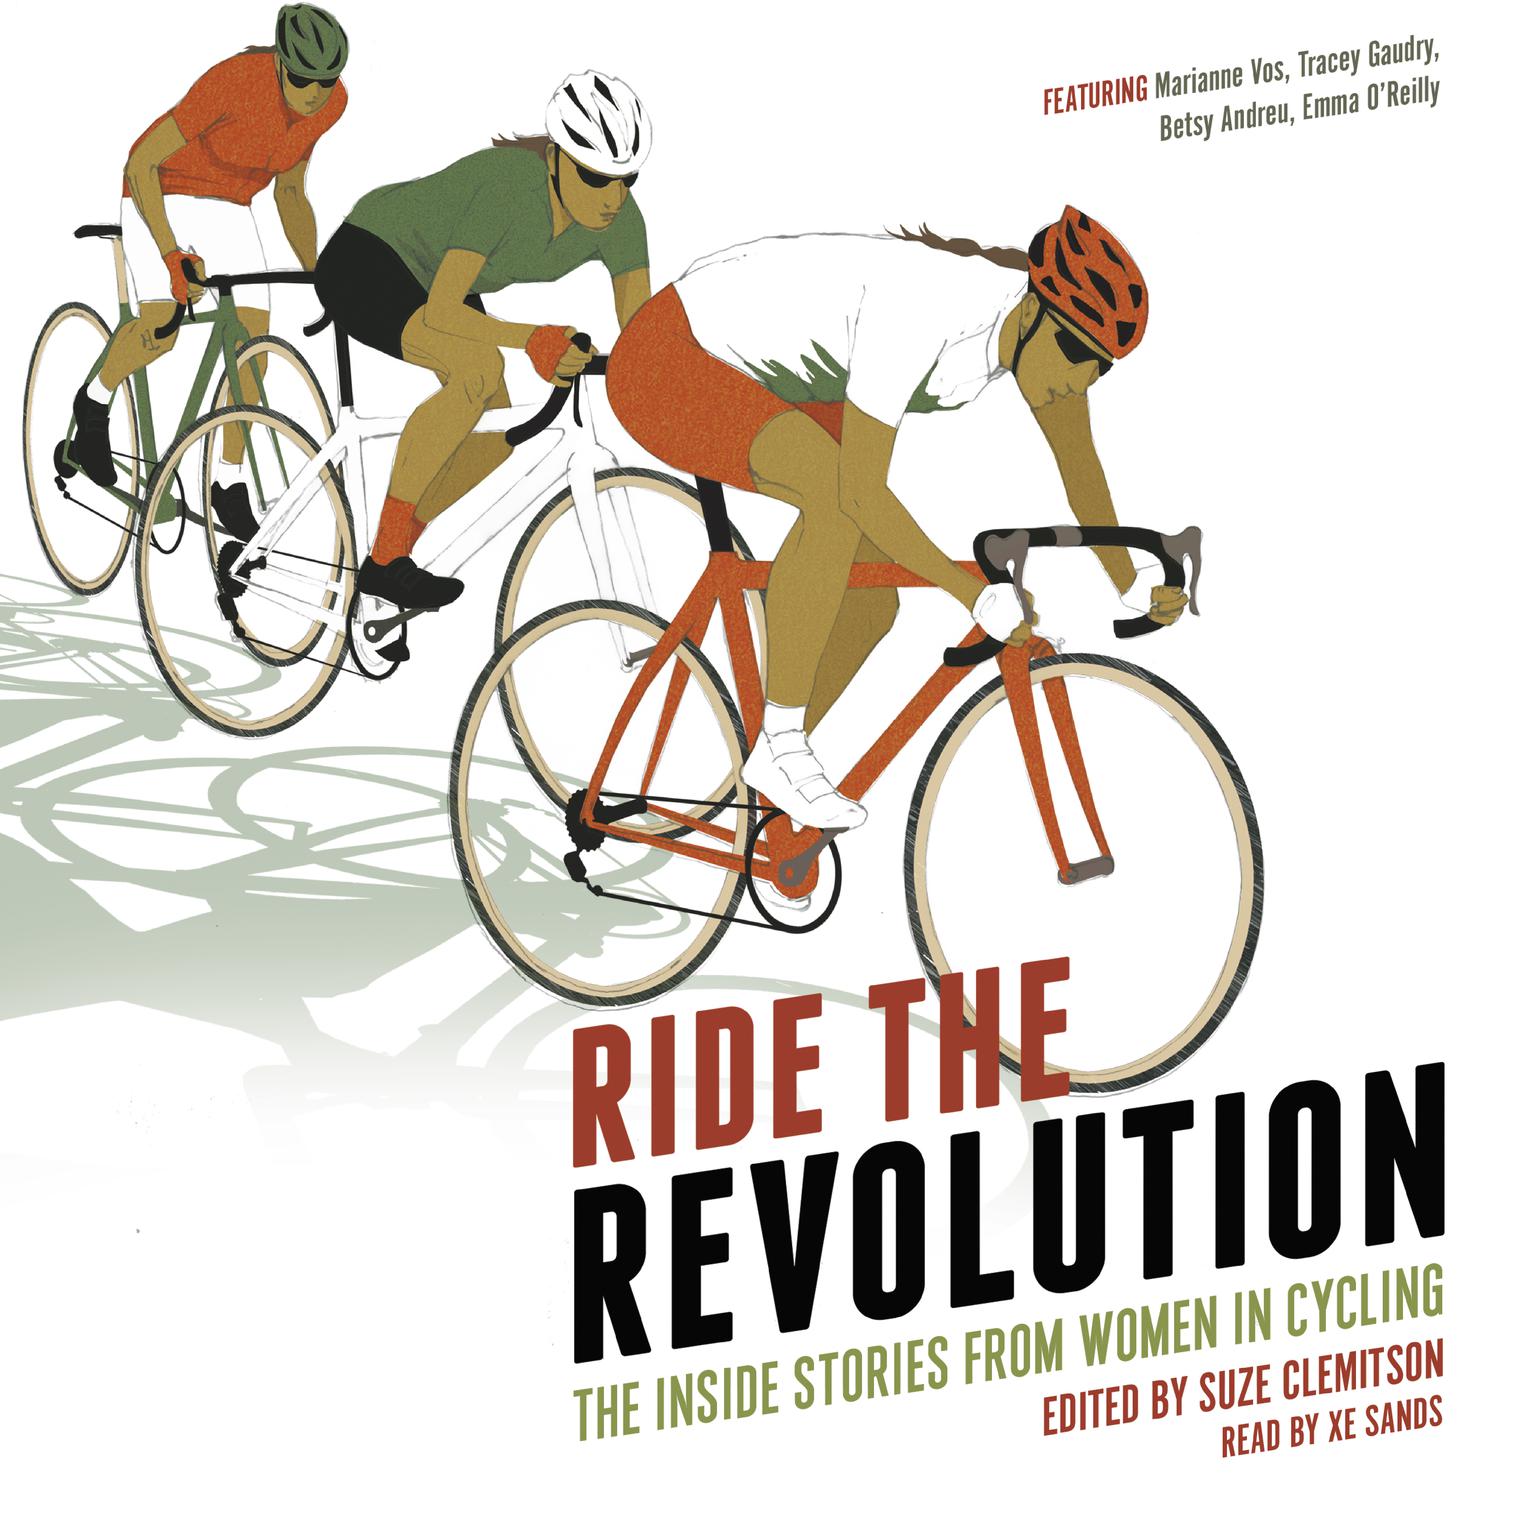 Ride the Revolution - The Inside Stories from Women in Cycling Audiobook, by Suze Clemitson